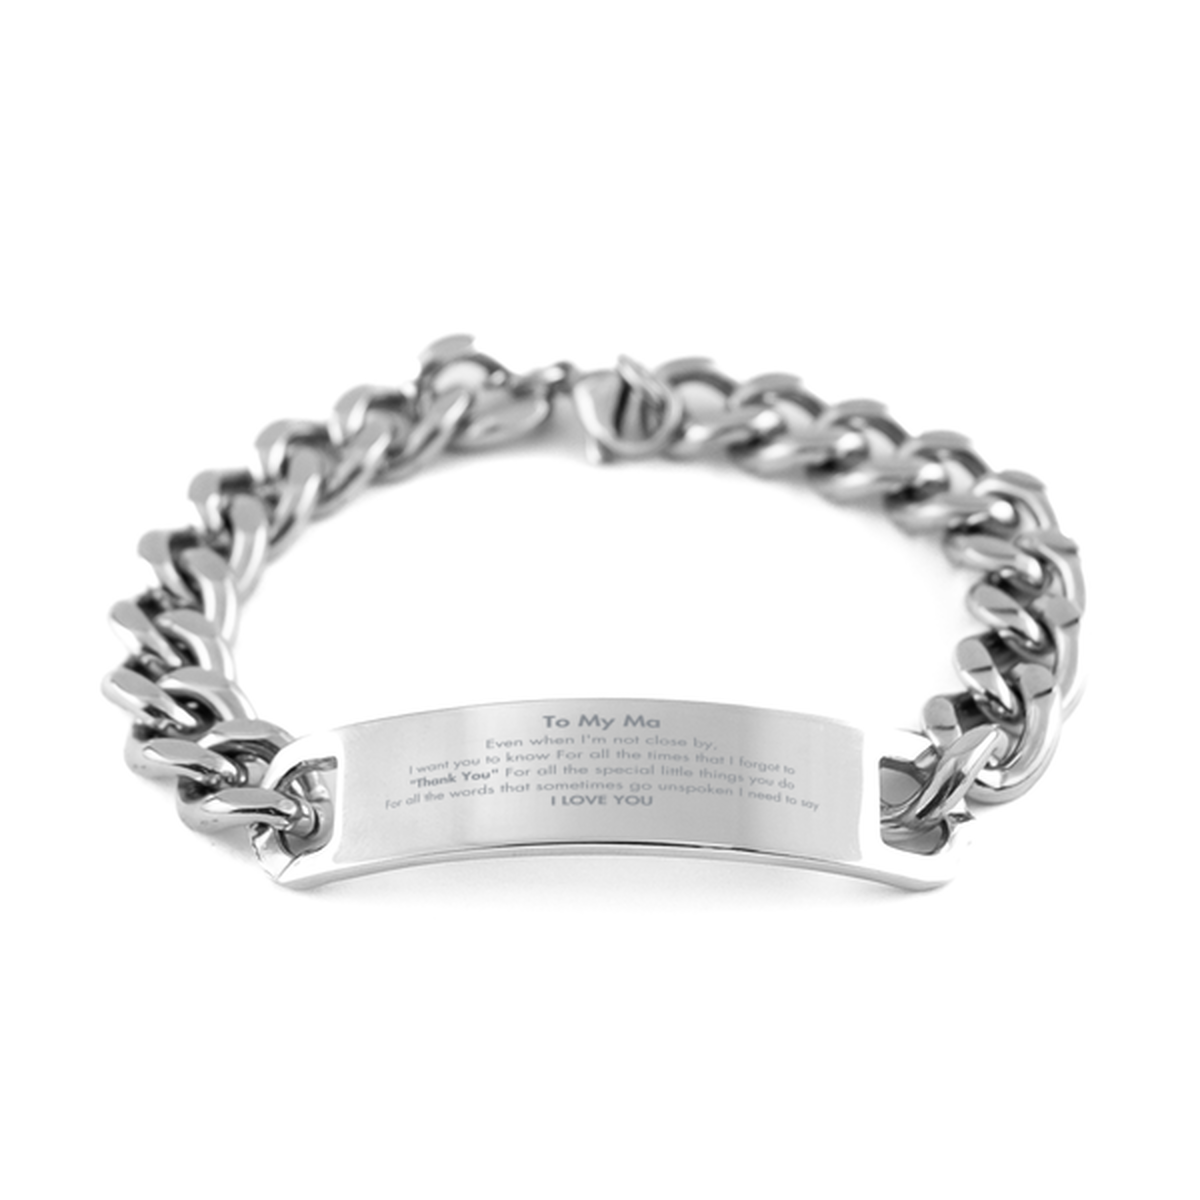 Thank You Gifts for Ma, Keepsake Cuban Chain Stainless Steel Bracelet Gifts for Ma Birthday Mother's day Father's Day Ma For all the words That sometimes go unspoken I need to say I LOVE YOU